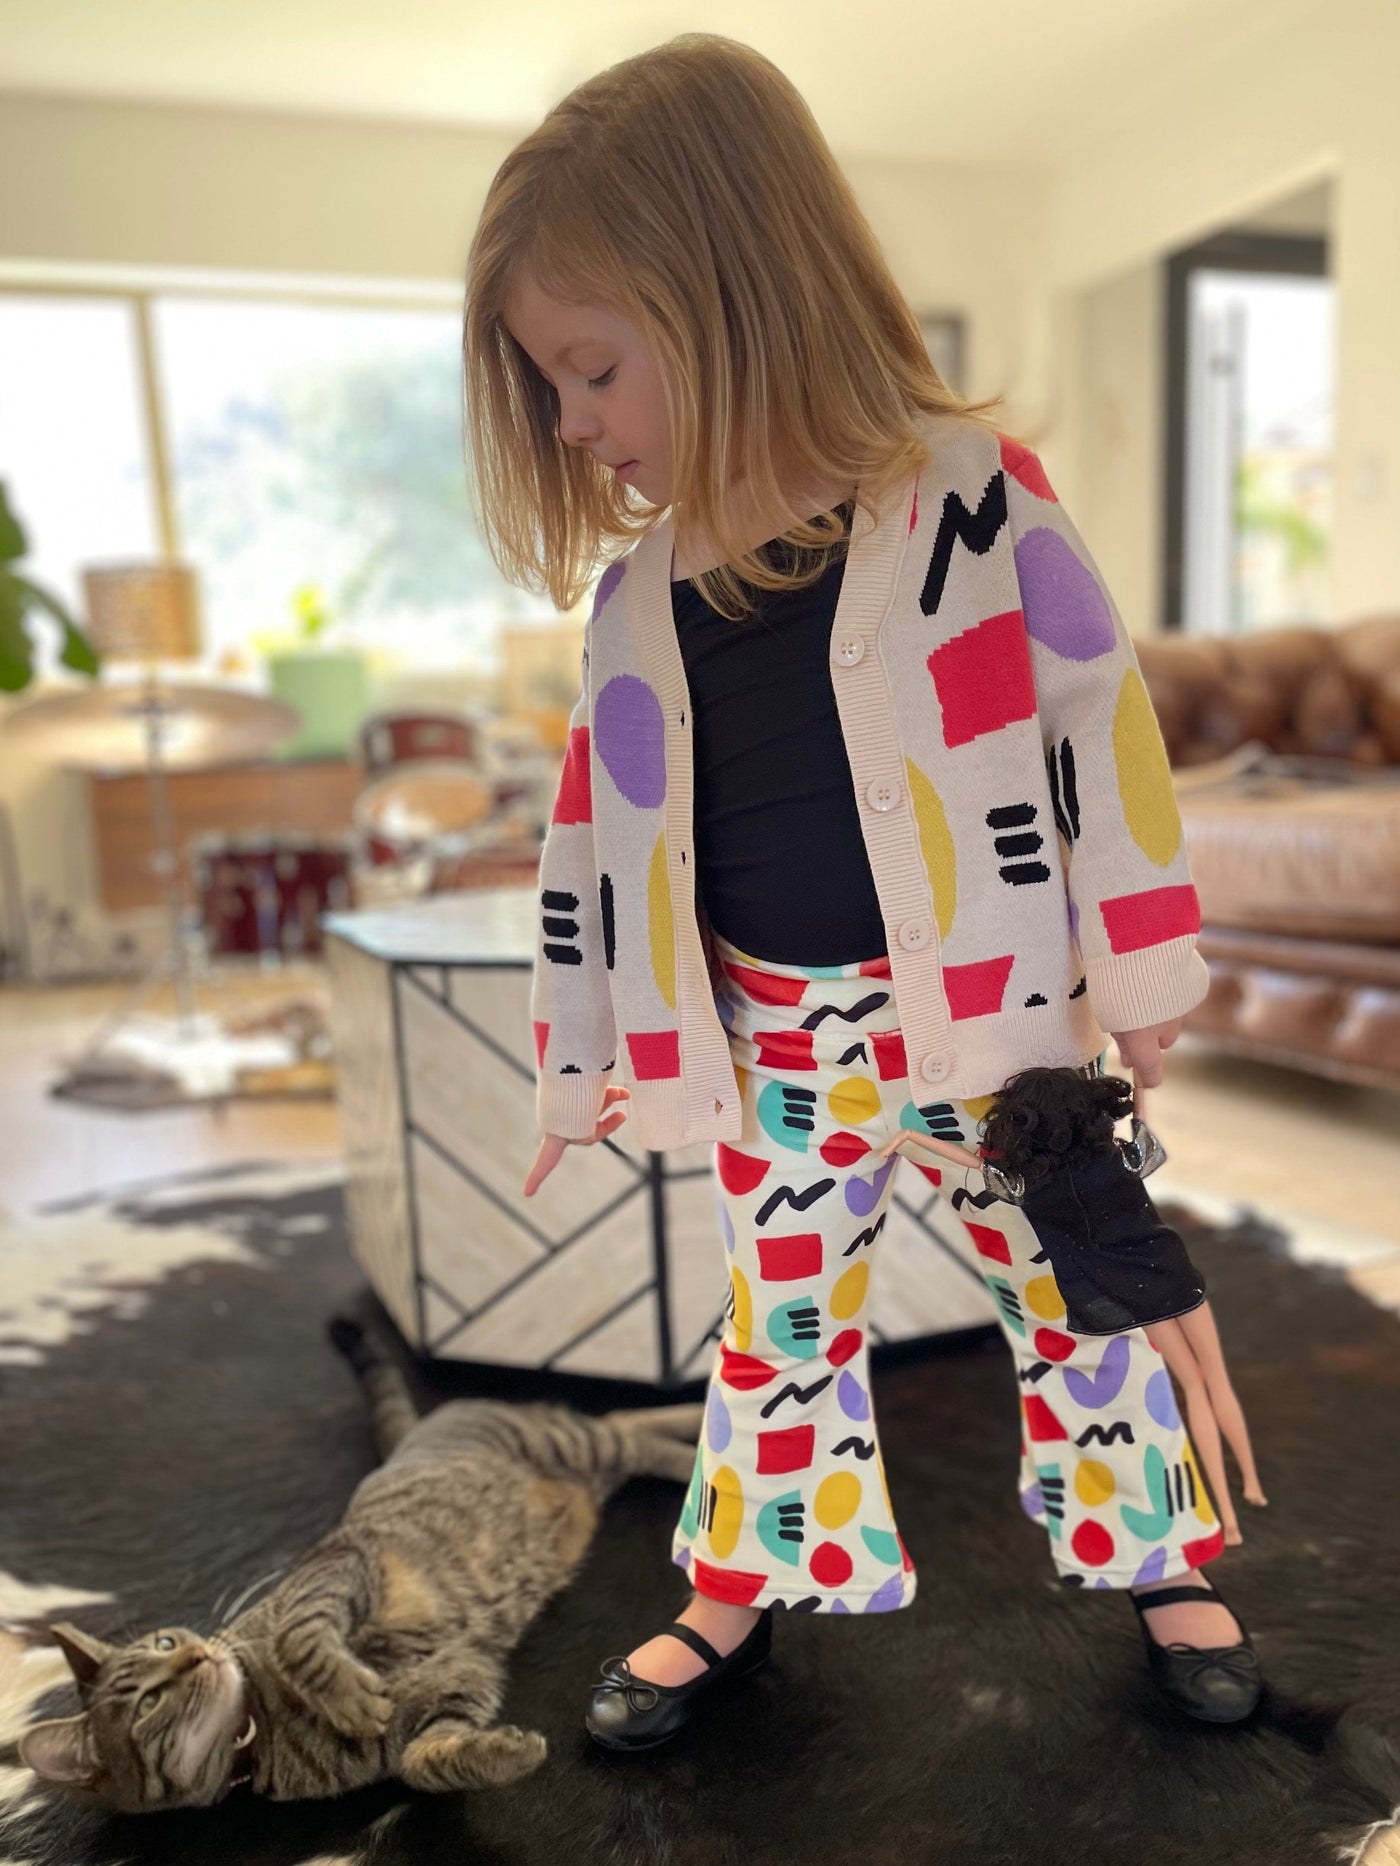 Best Day Ever Kids Baby & Toddler Outerwear Abstract Print Cardigan buy online boutique kids clothing